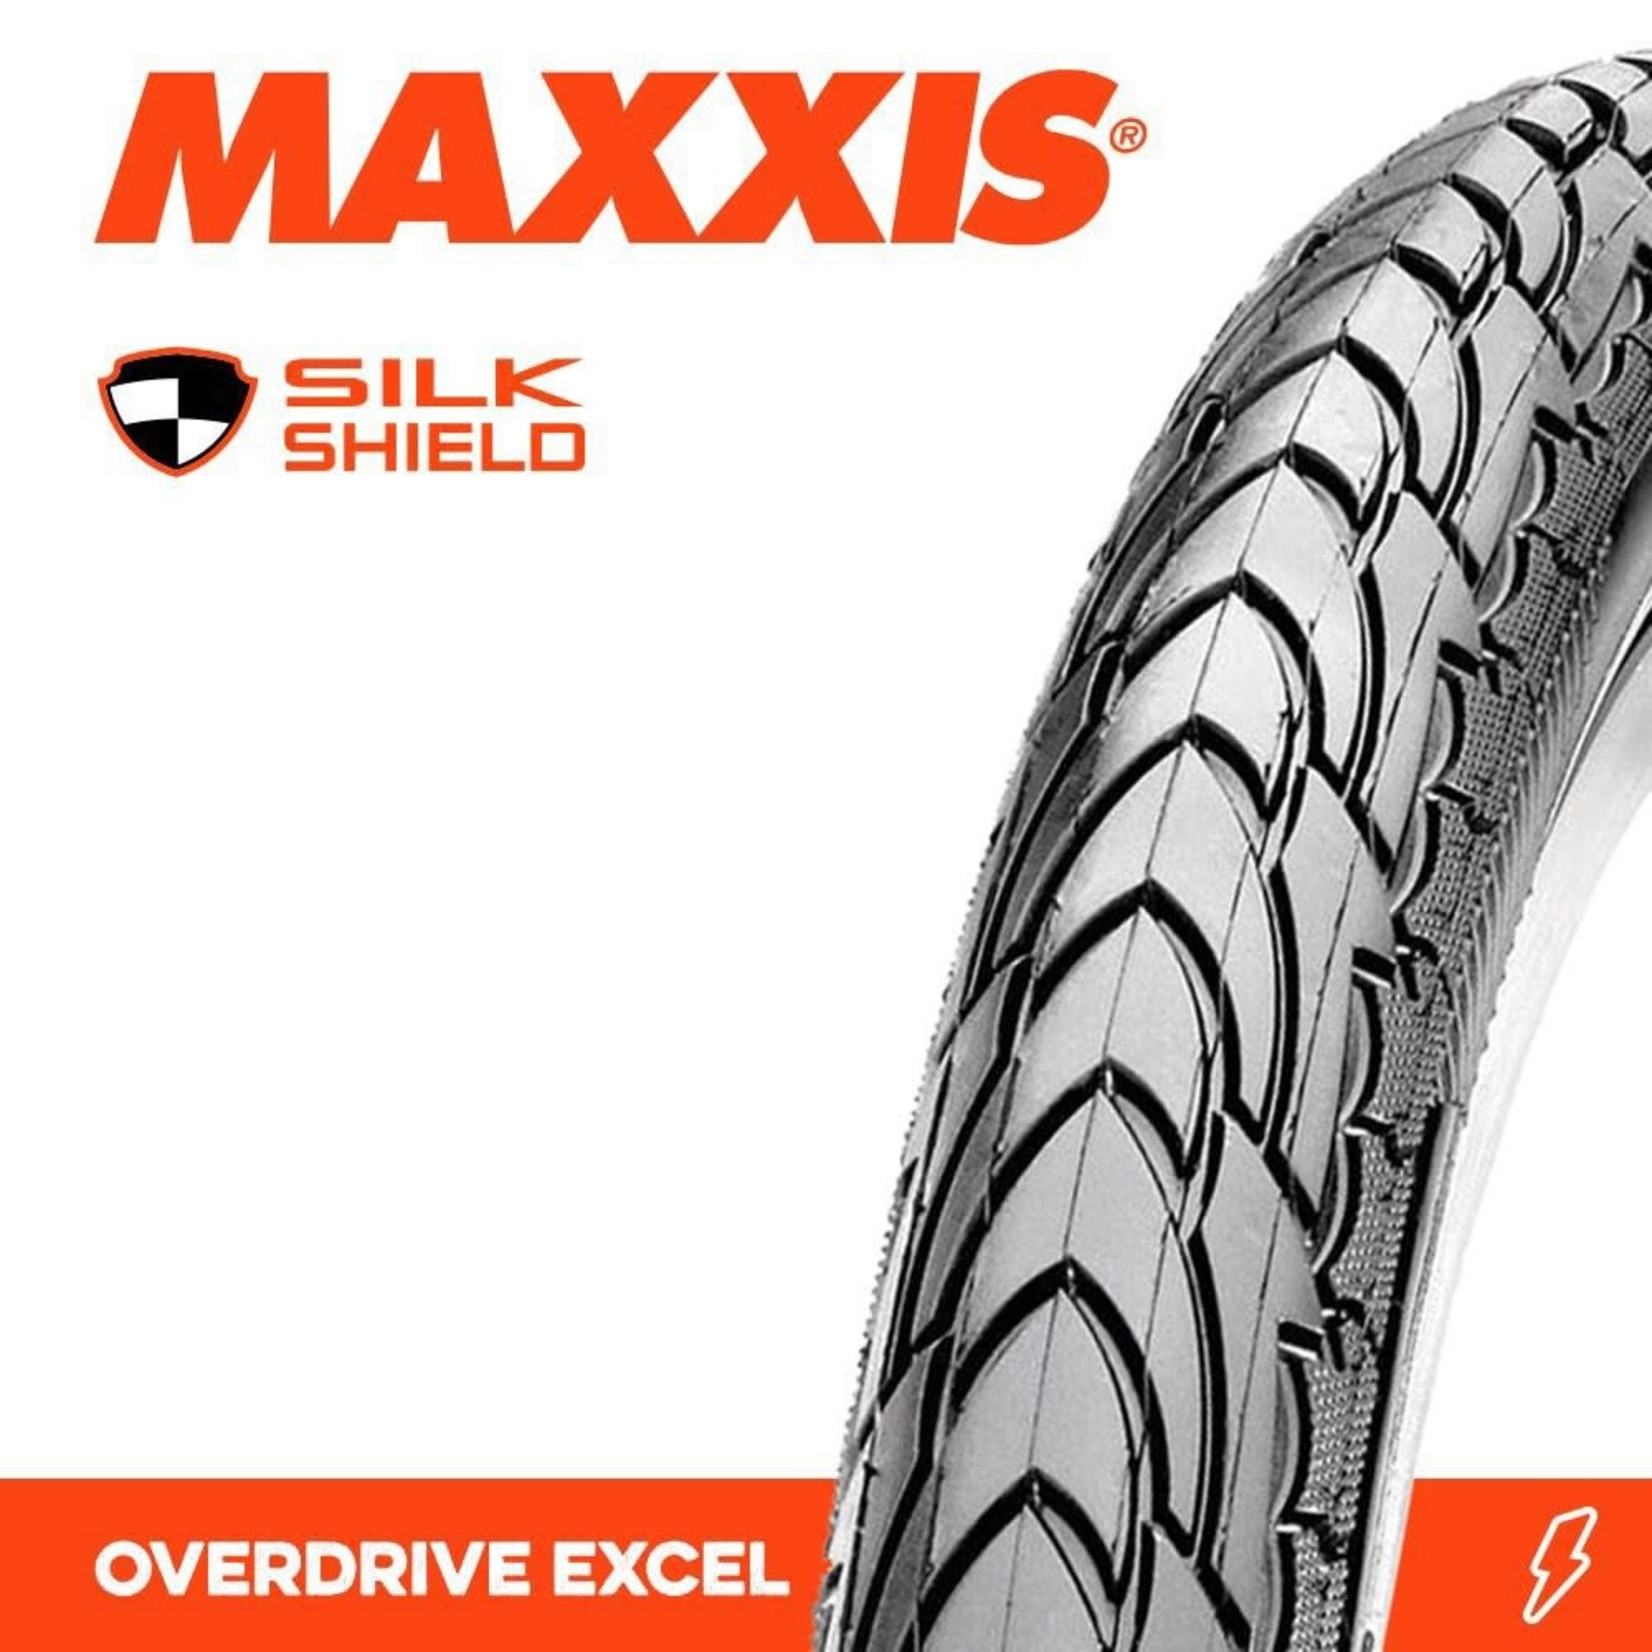 Maxxis Maxxis Overdrive Bike Tyre - 700X35C- 60TPI Silkshield Wire Bead Tyre - Pair